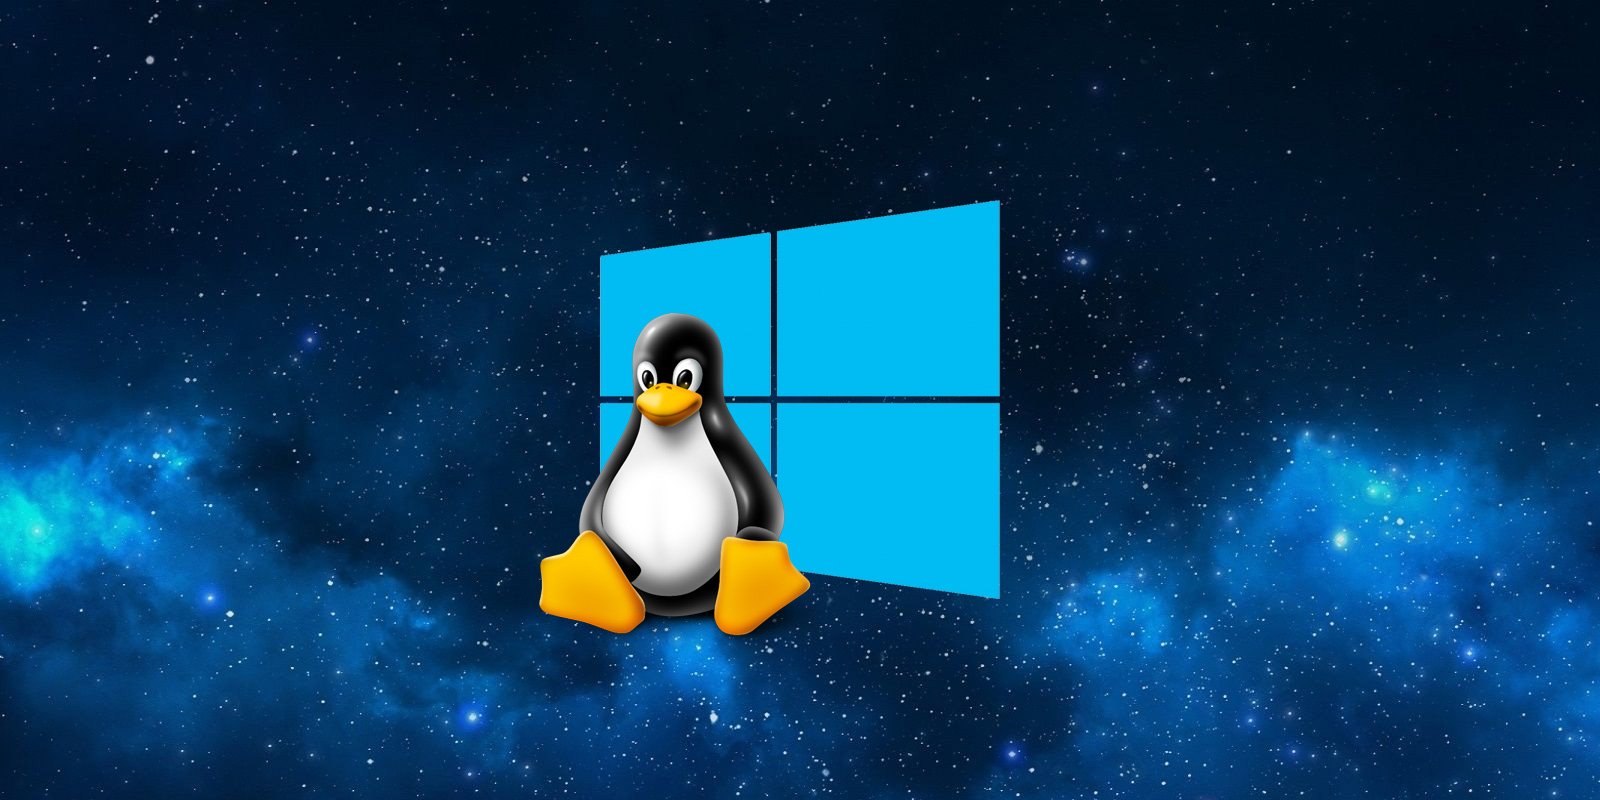 Windows Subsystem for Linux gets new ‘mirrored’ network mode – Source: www.bleepingcomputer.com